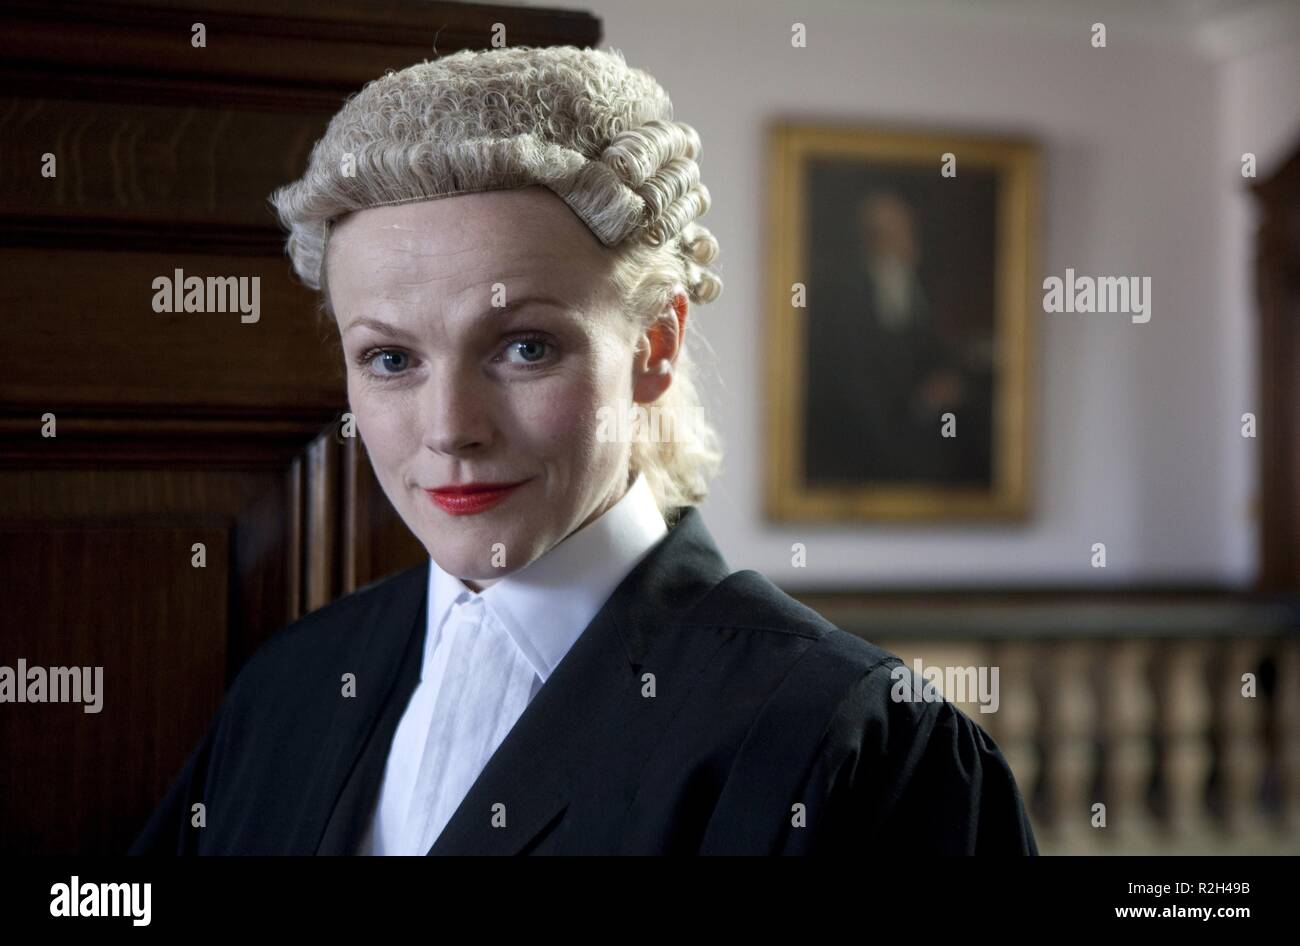 Woman Barrister Wig High Resolution Stock Photography and Images - Alamy